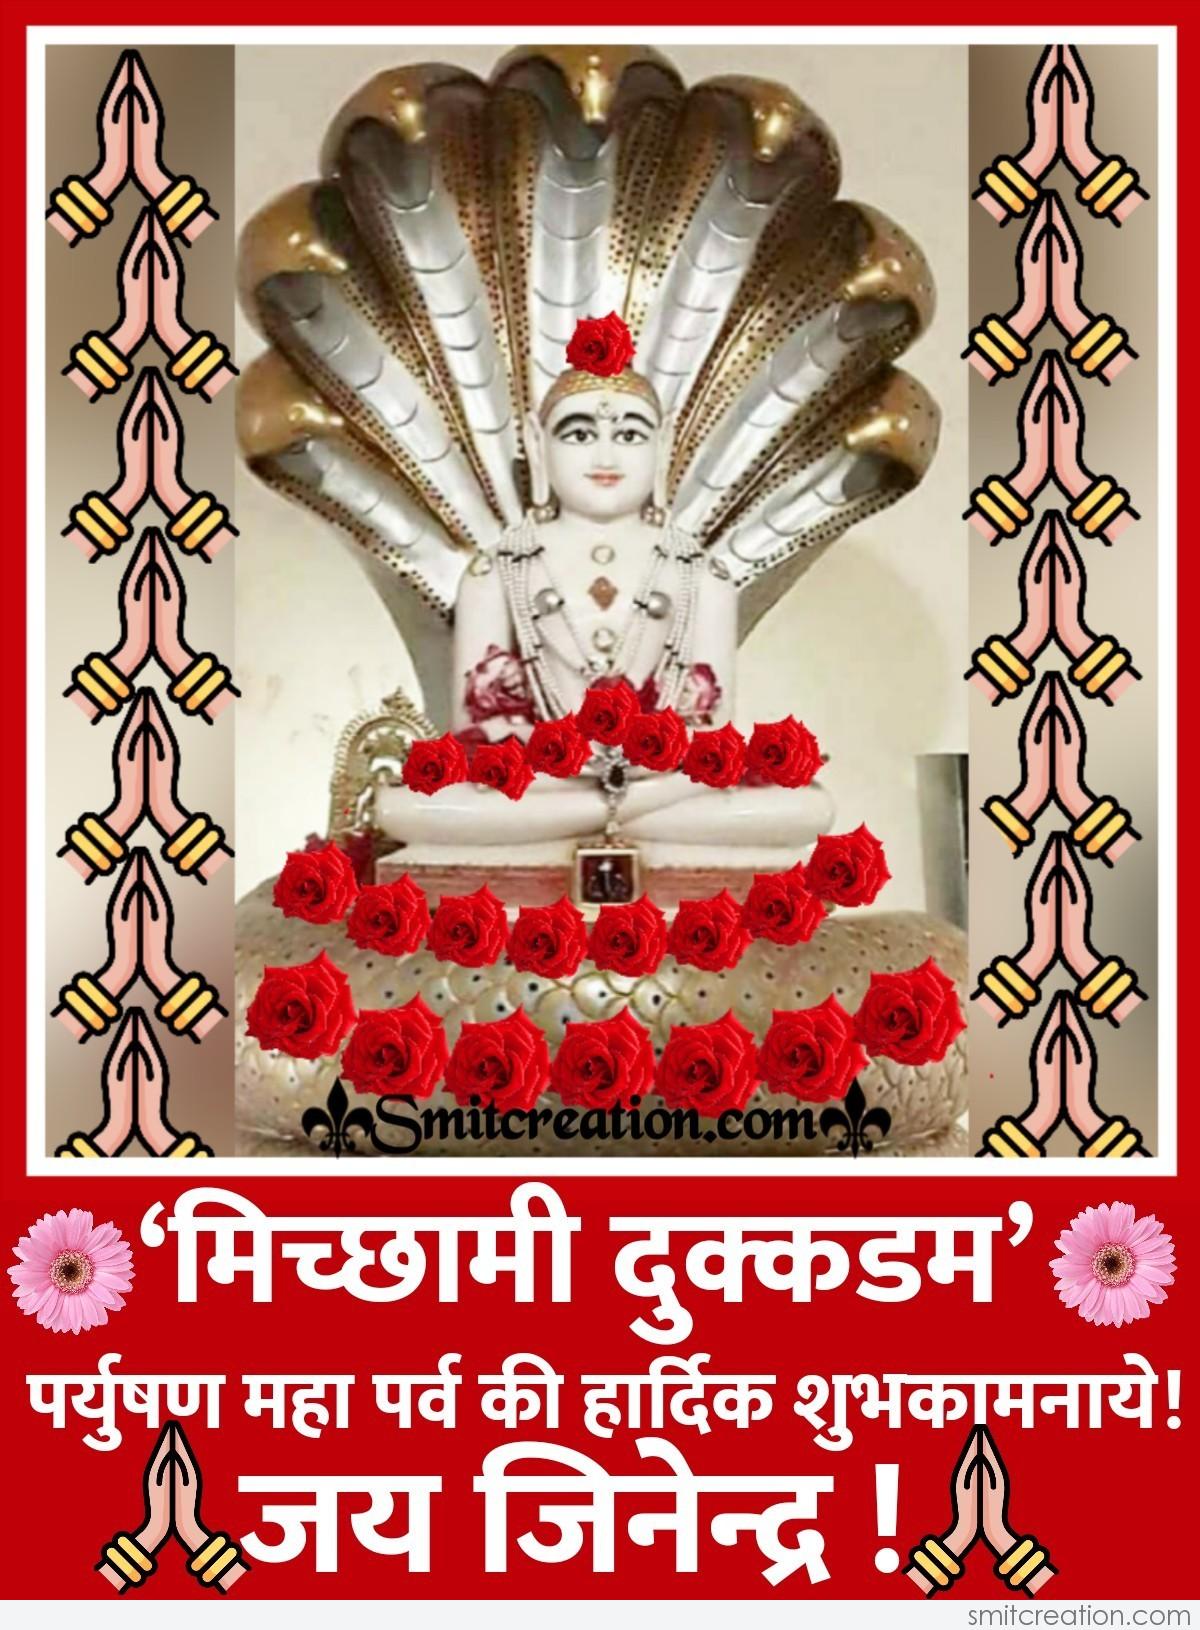 10+ Paryushan Parva In Hindi - Pictures and Graphics for different festivals